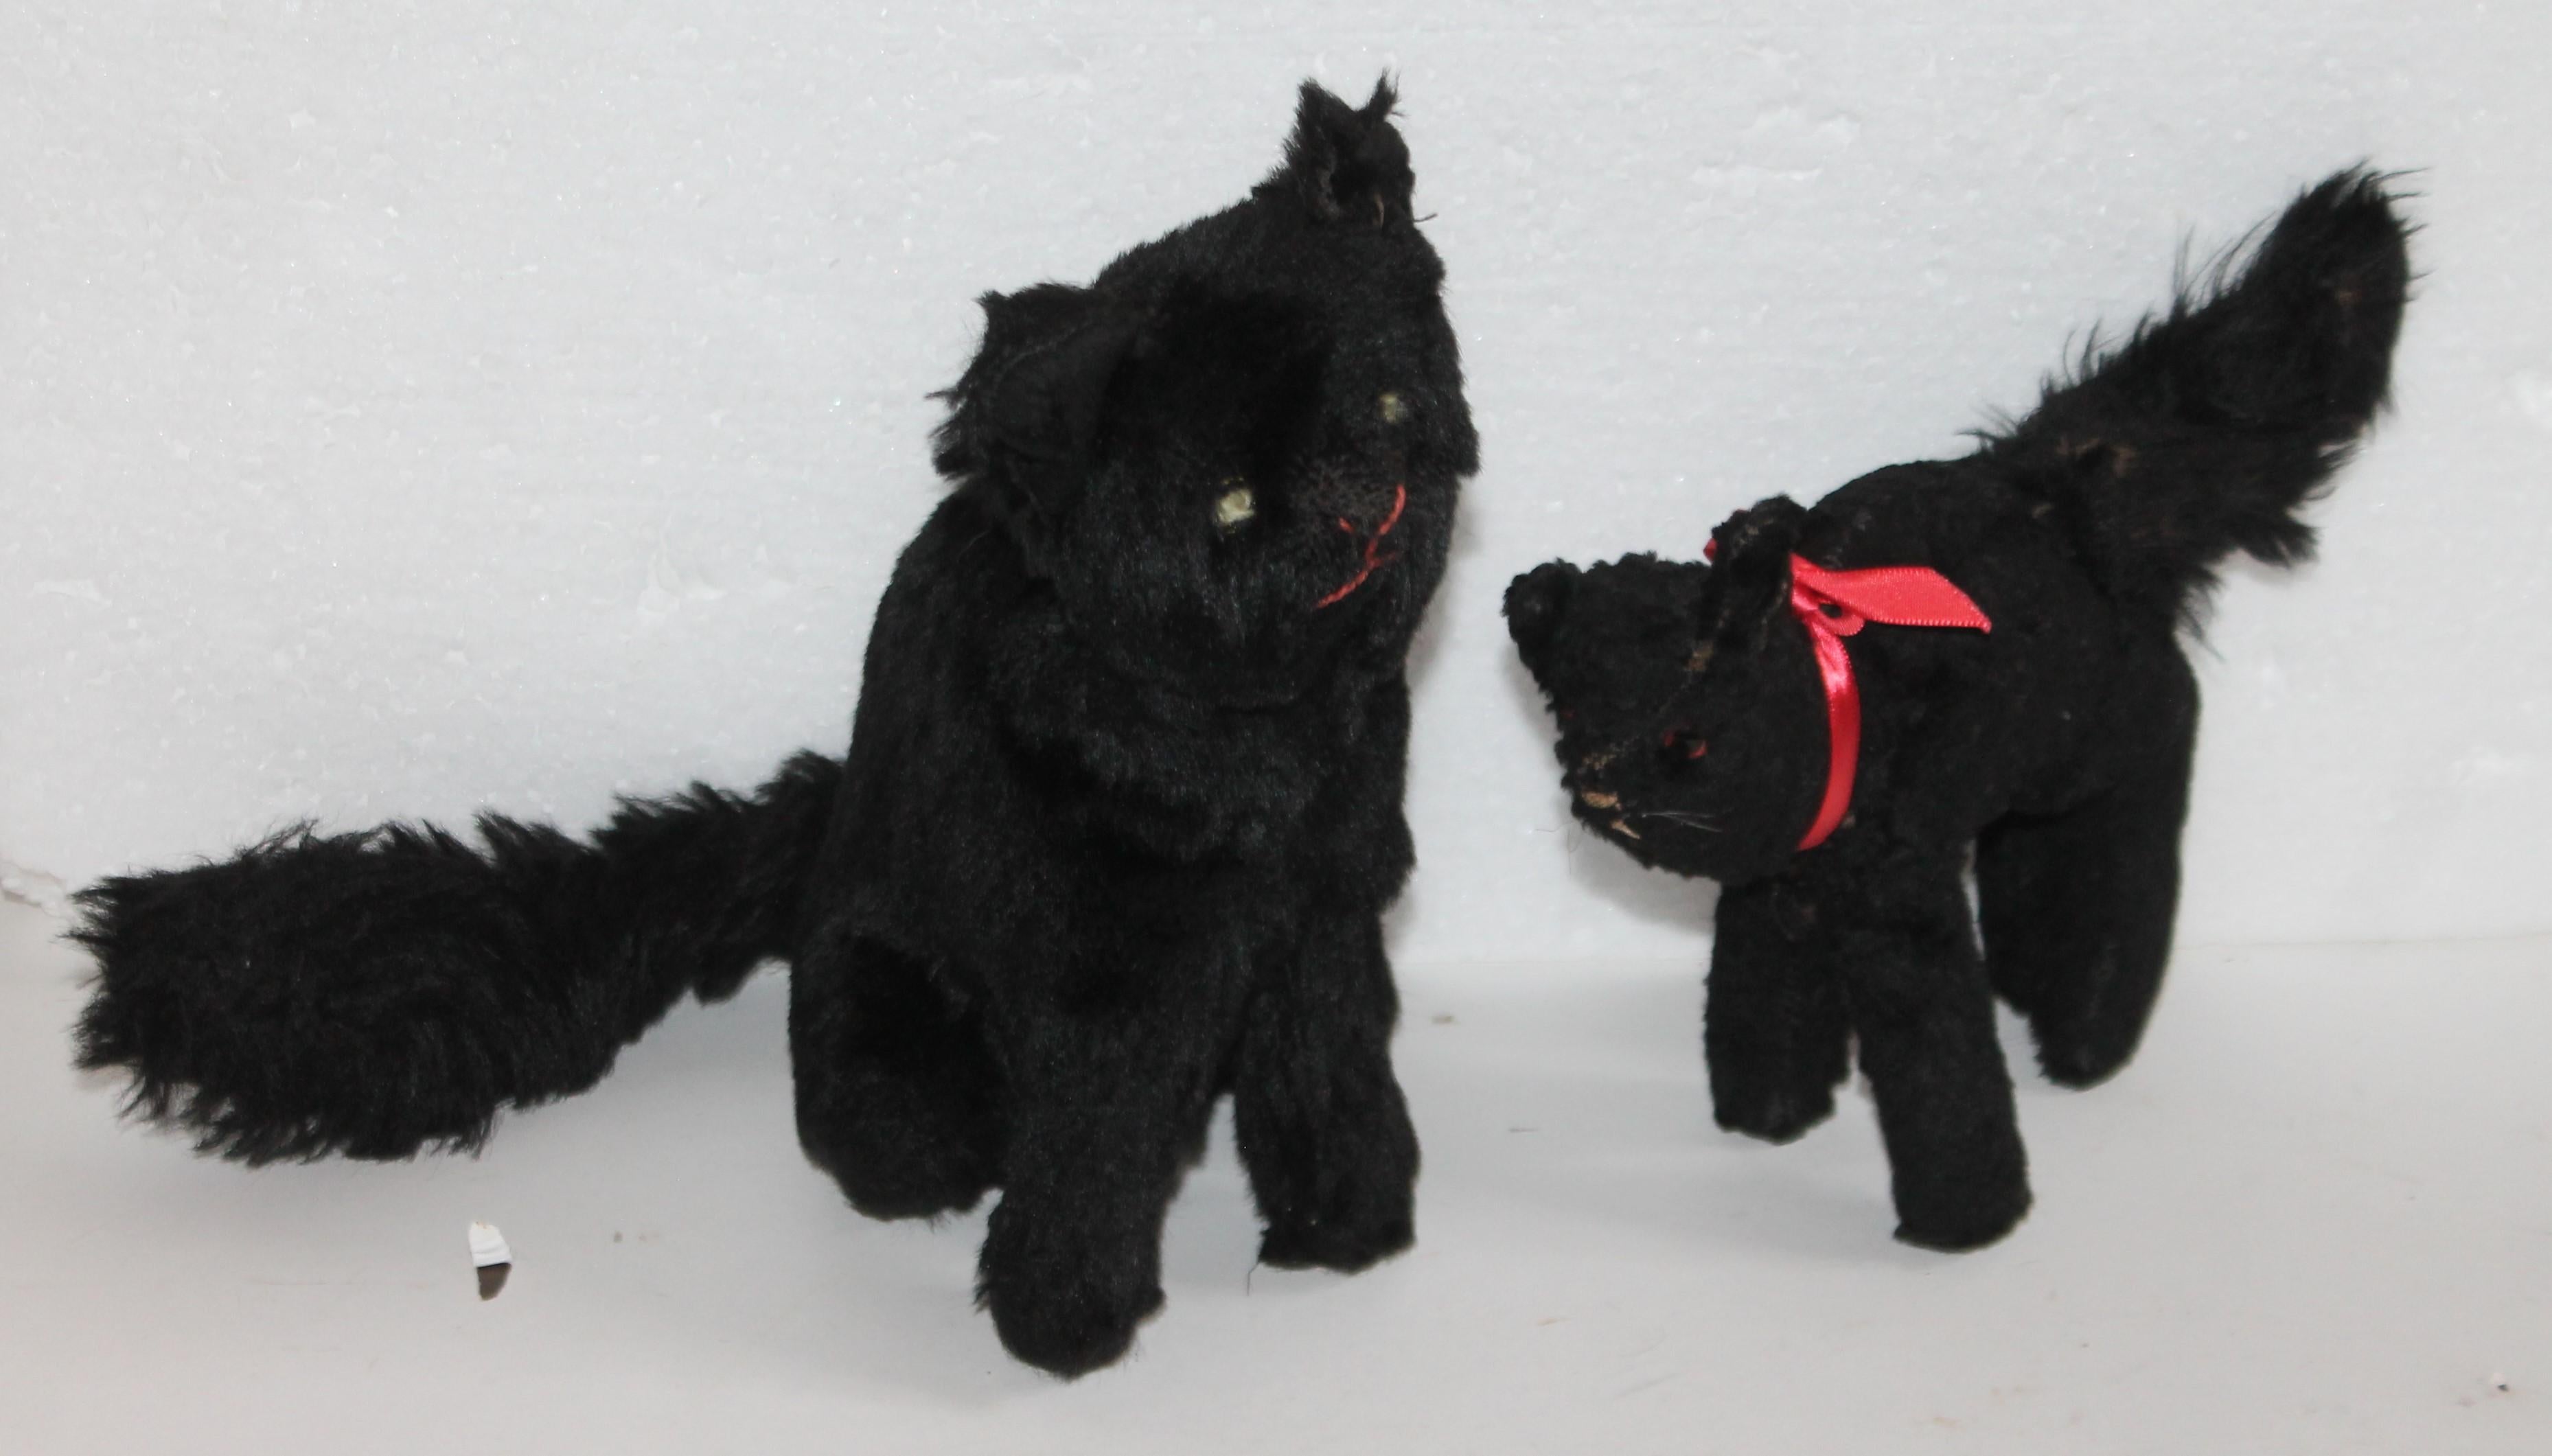 Two handmade black cats with glass eyes and hand sewn eyes with threading. The condition are very good. Just in time for Halloween!